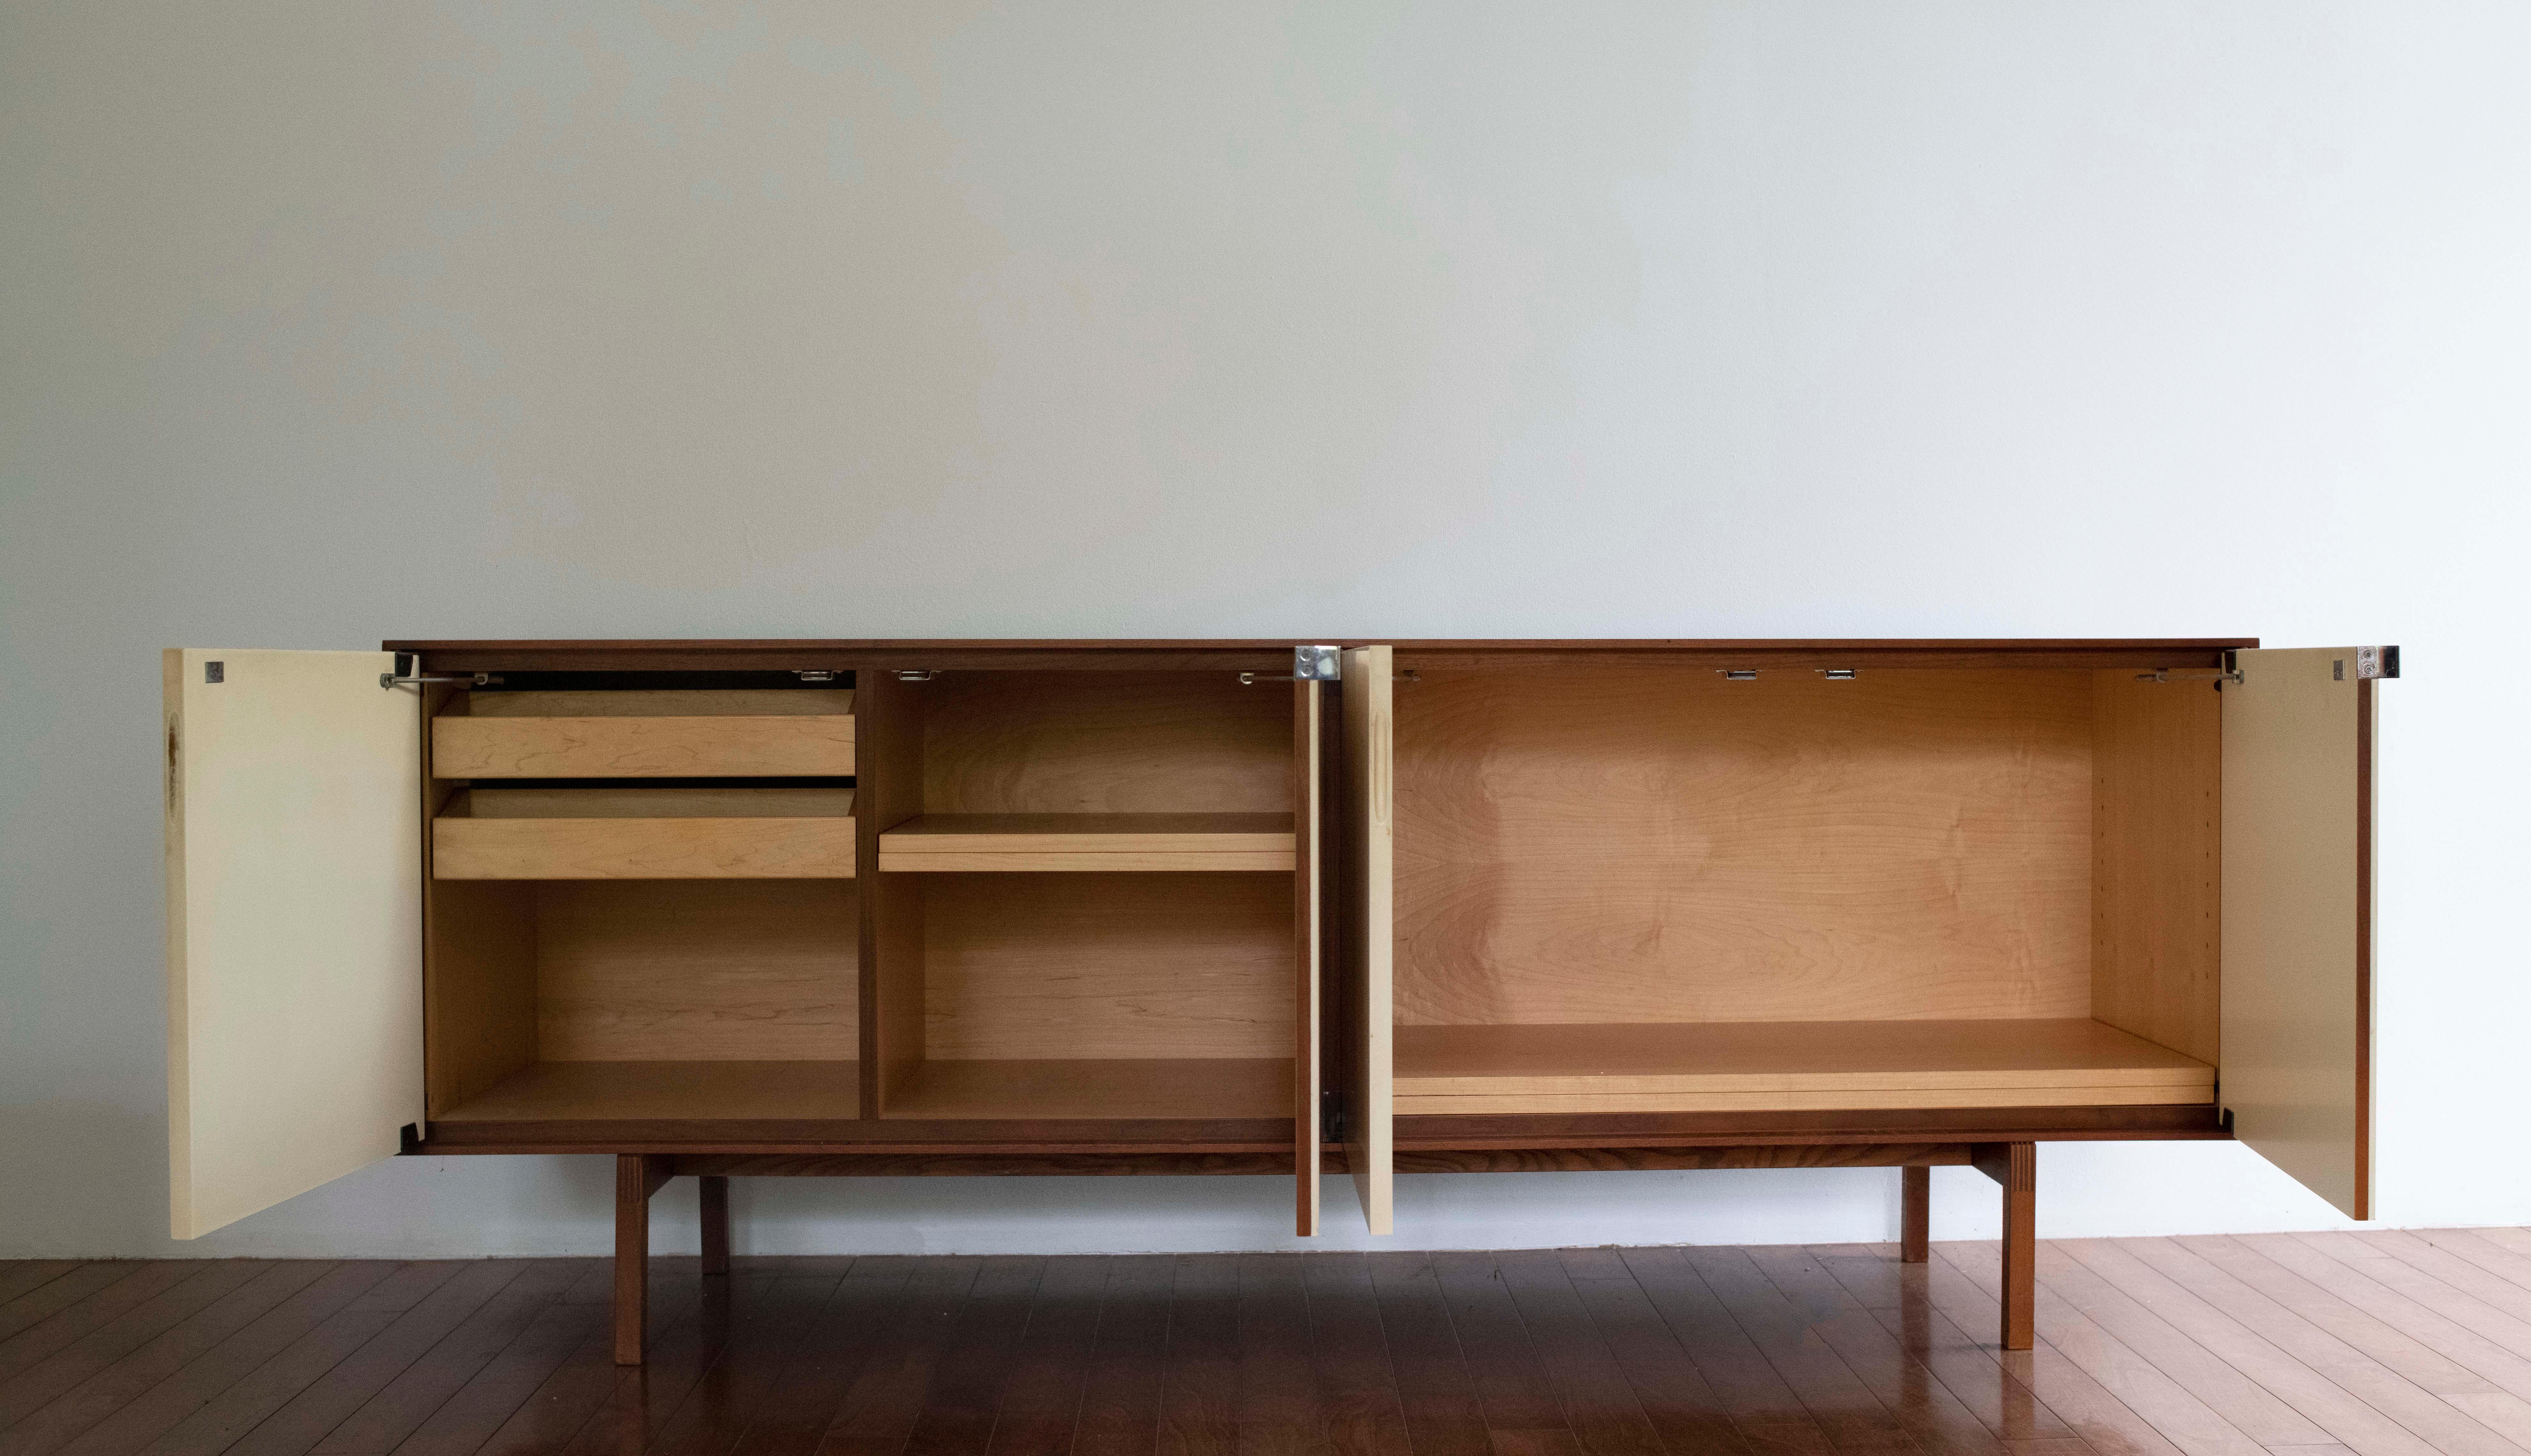 Mid-20th Century Florence Knoll Credenza